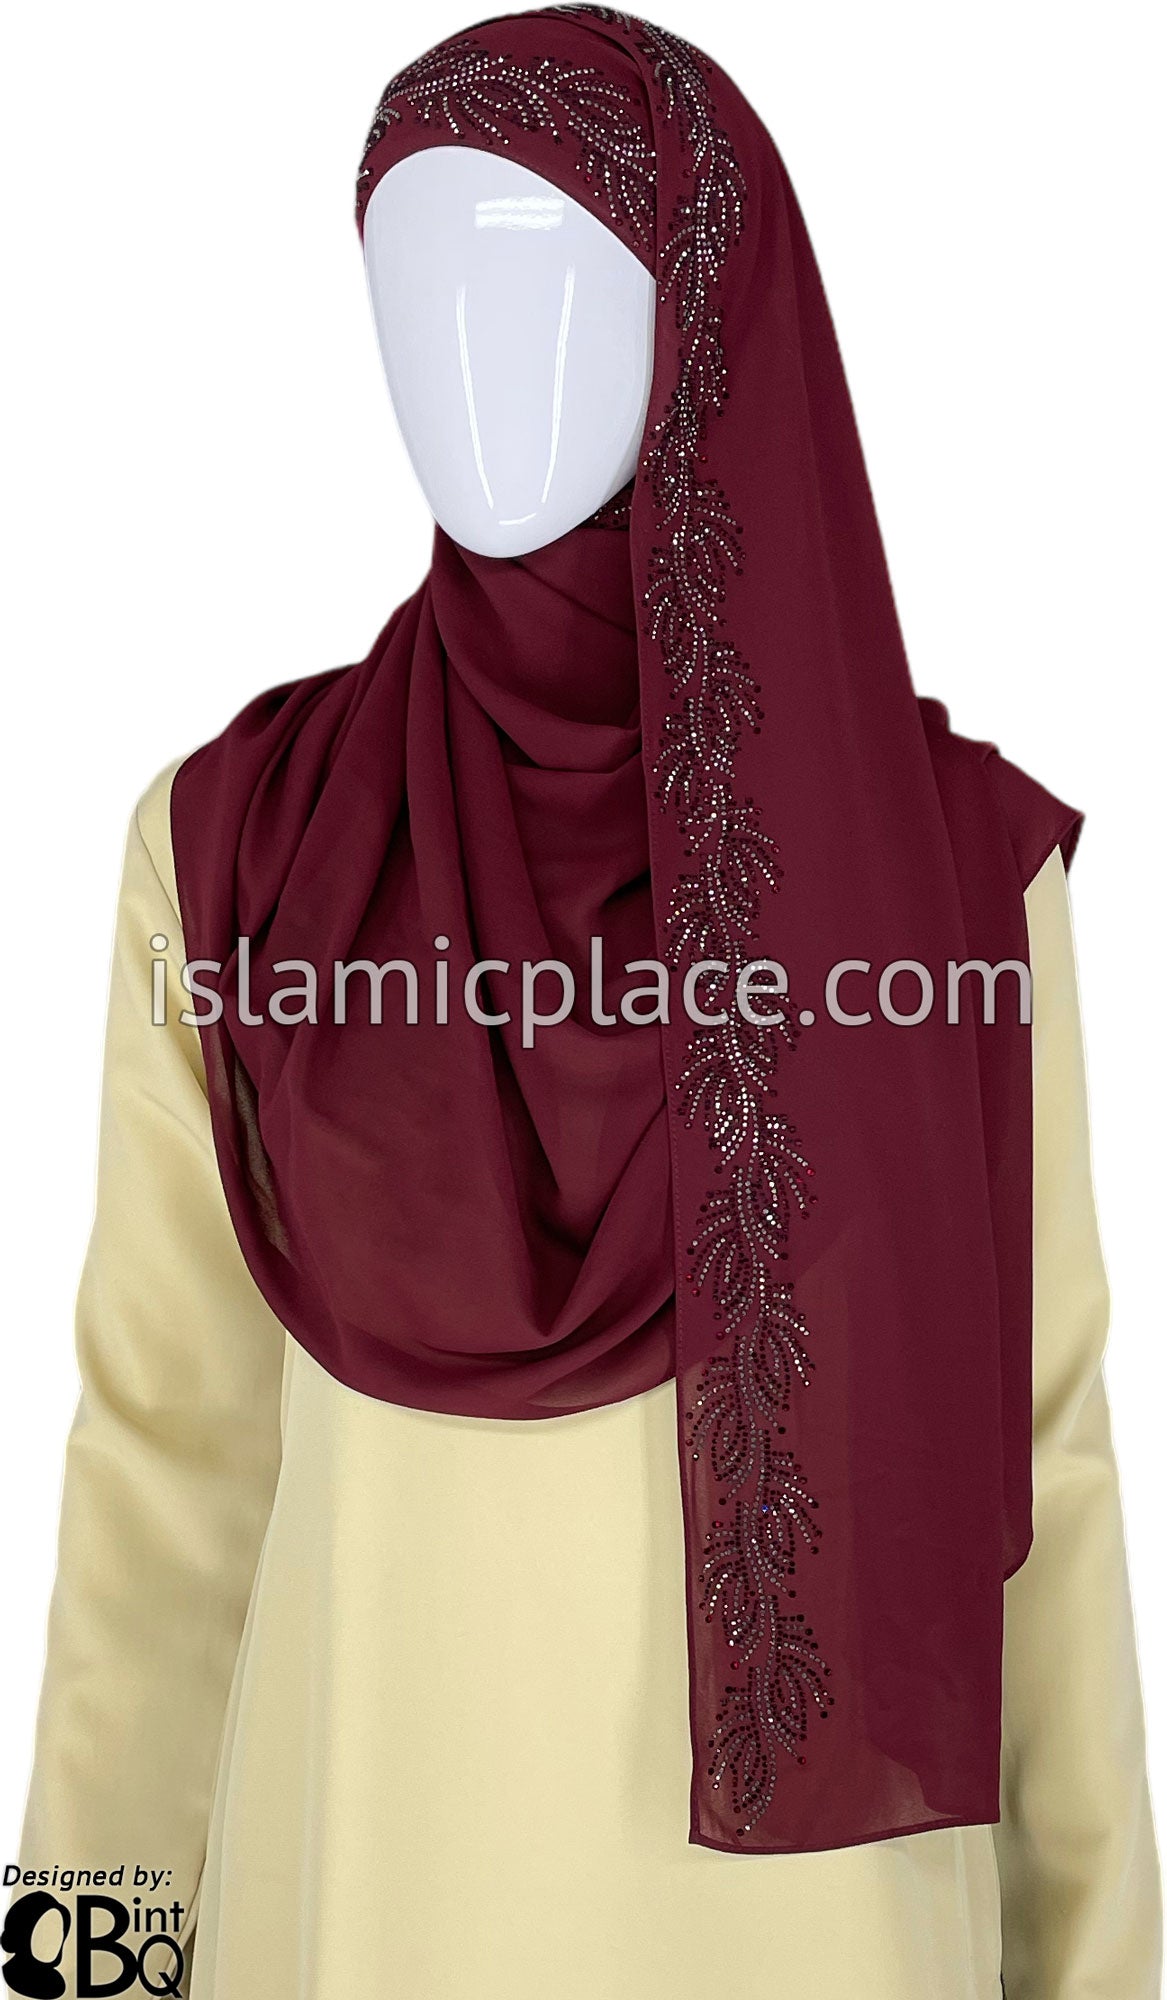 Burgundy with Silver Stones in Design 50 - Georgette Chiffon Shayla Long Rectangle Hijab 30"x70"